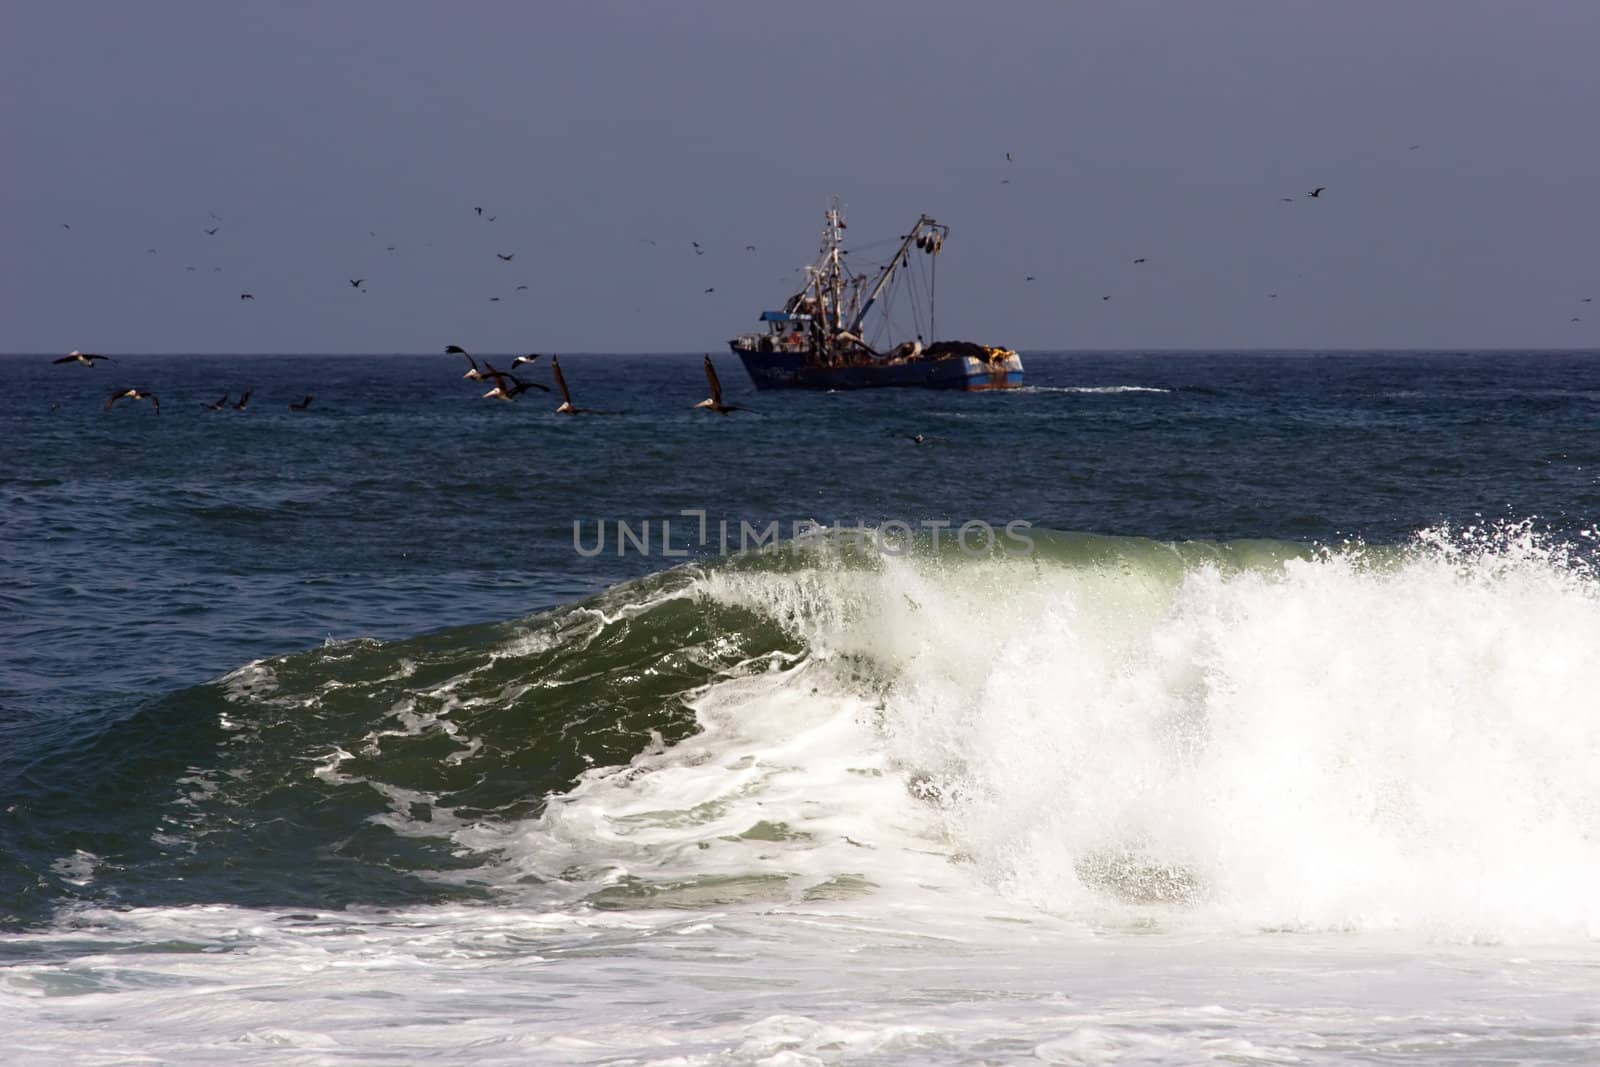 Surf and a trawler in the background by azotov